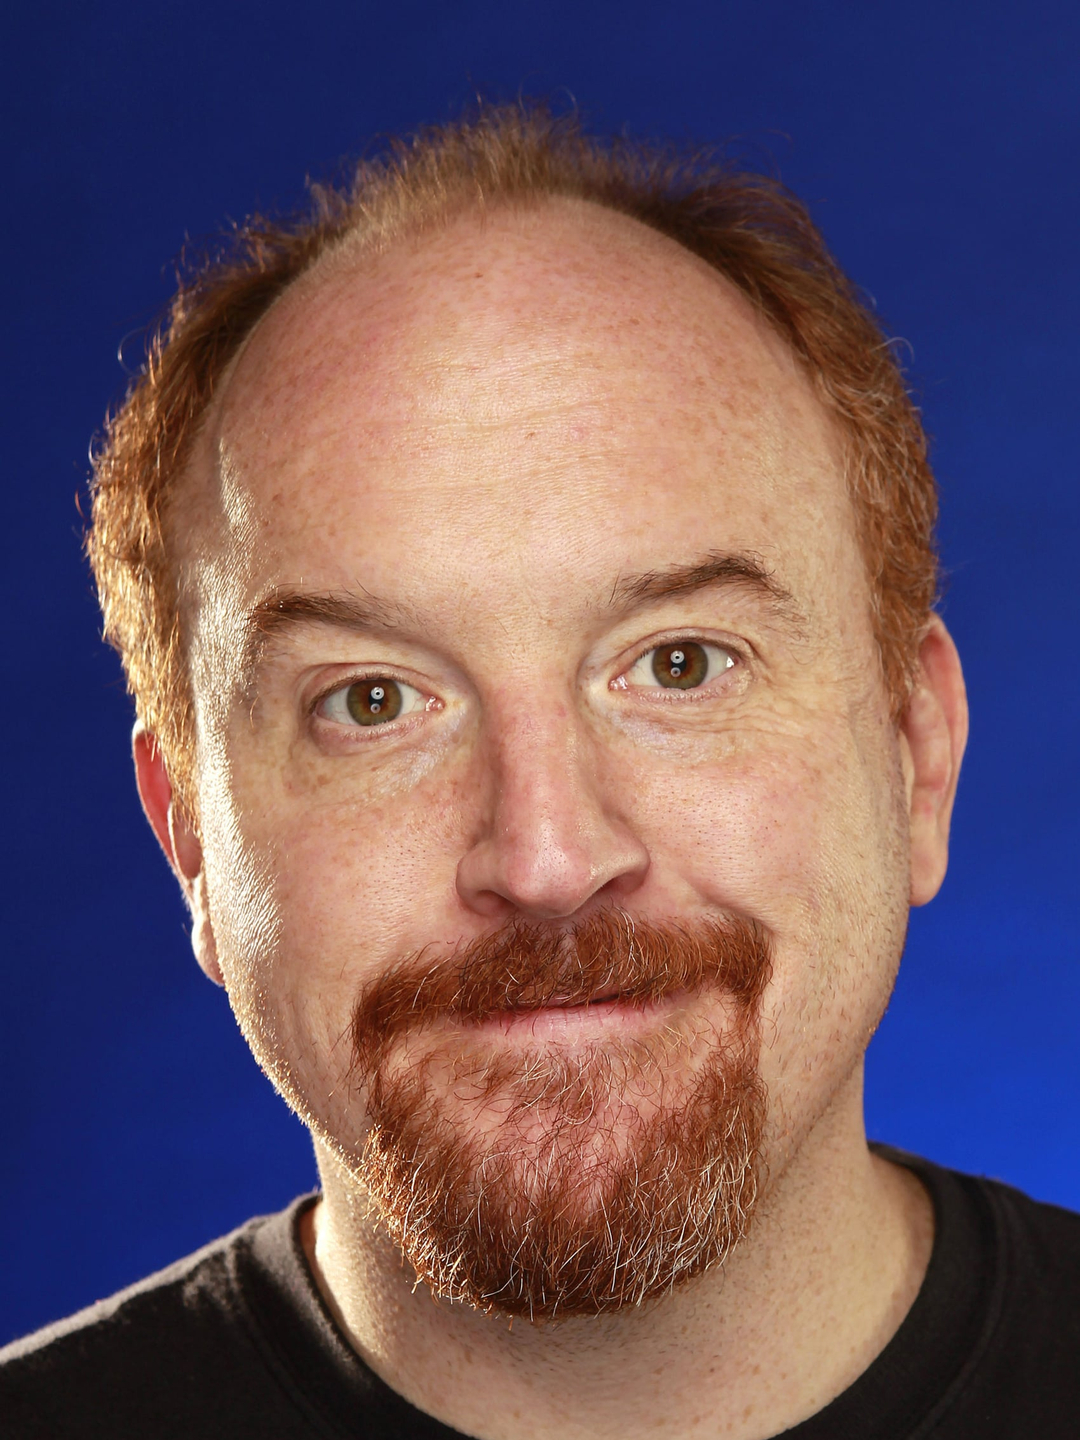 Louis C.K. in his youth